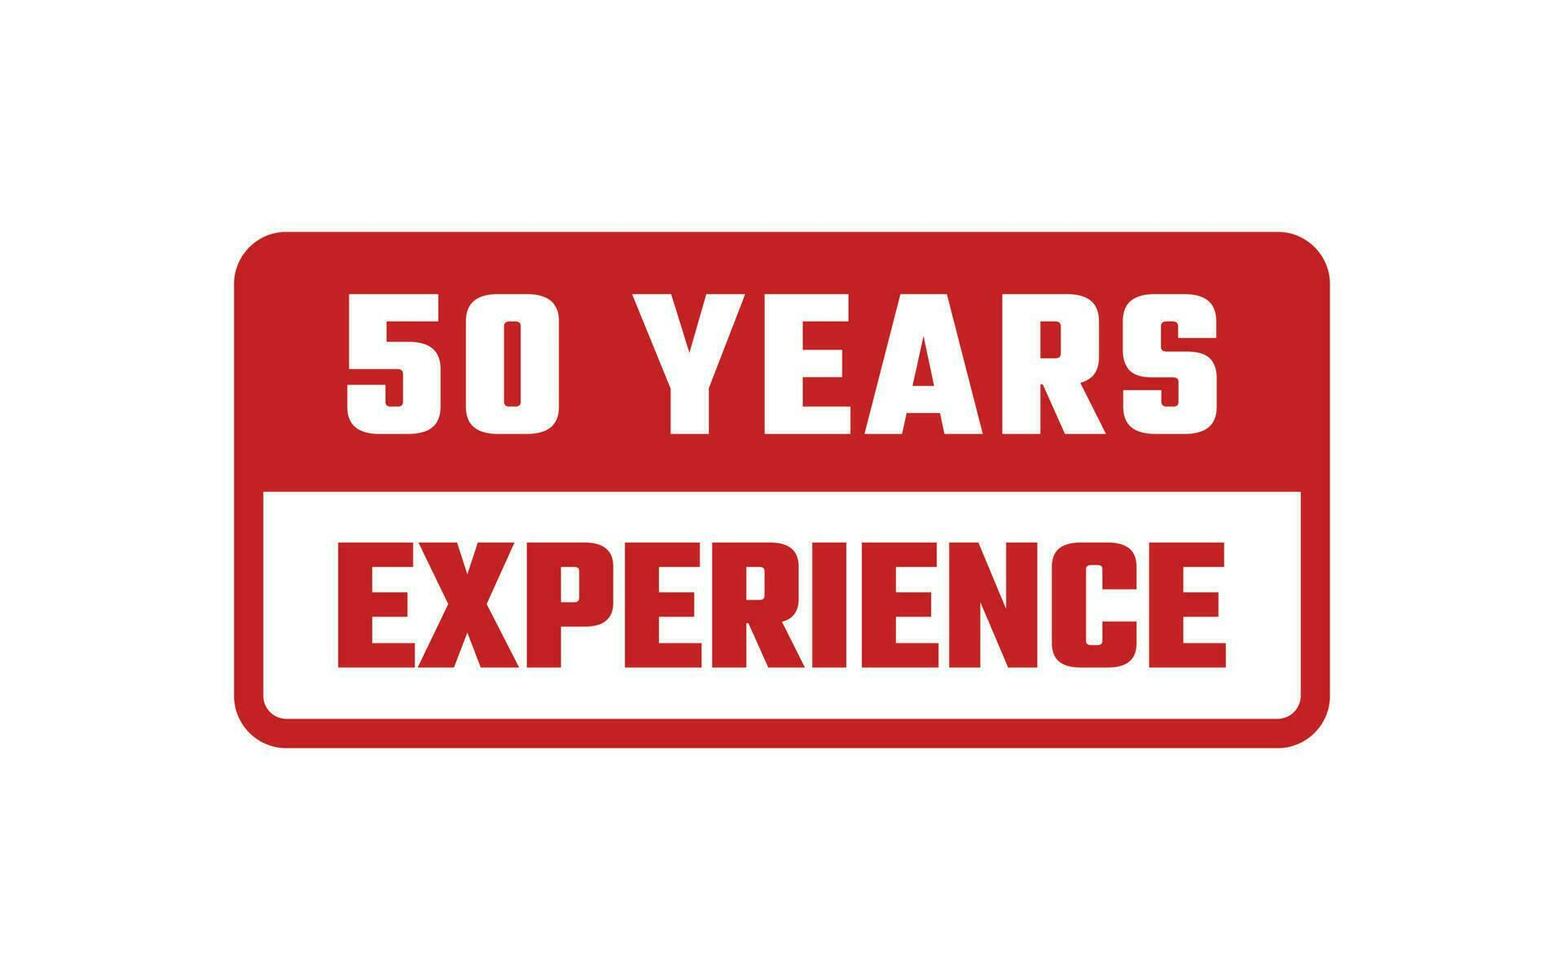 50 Years Experience Rubber Stamp vector